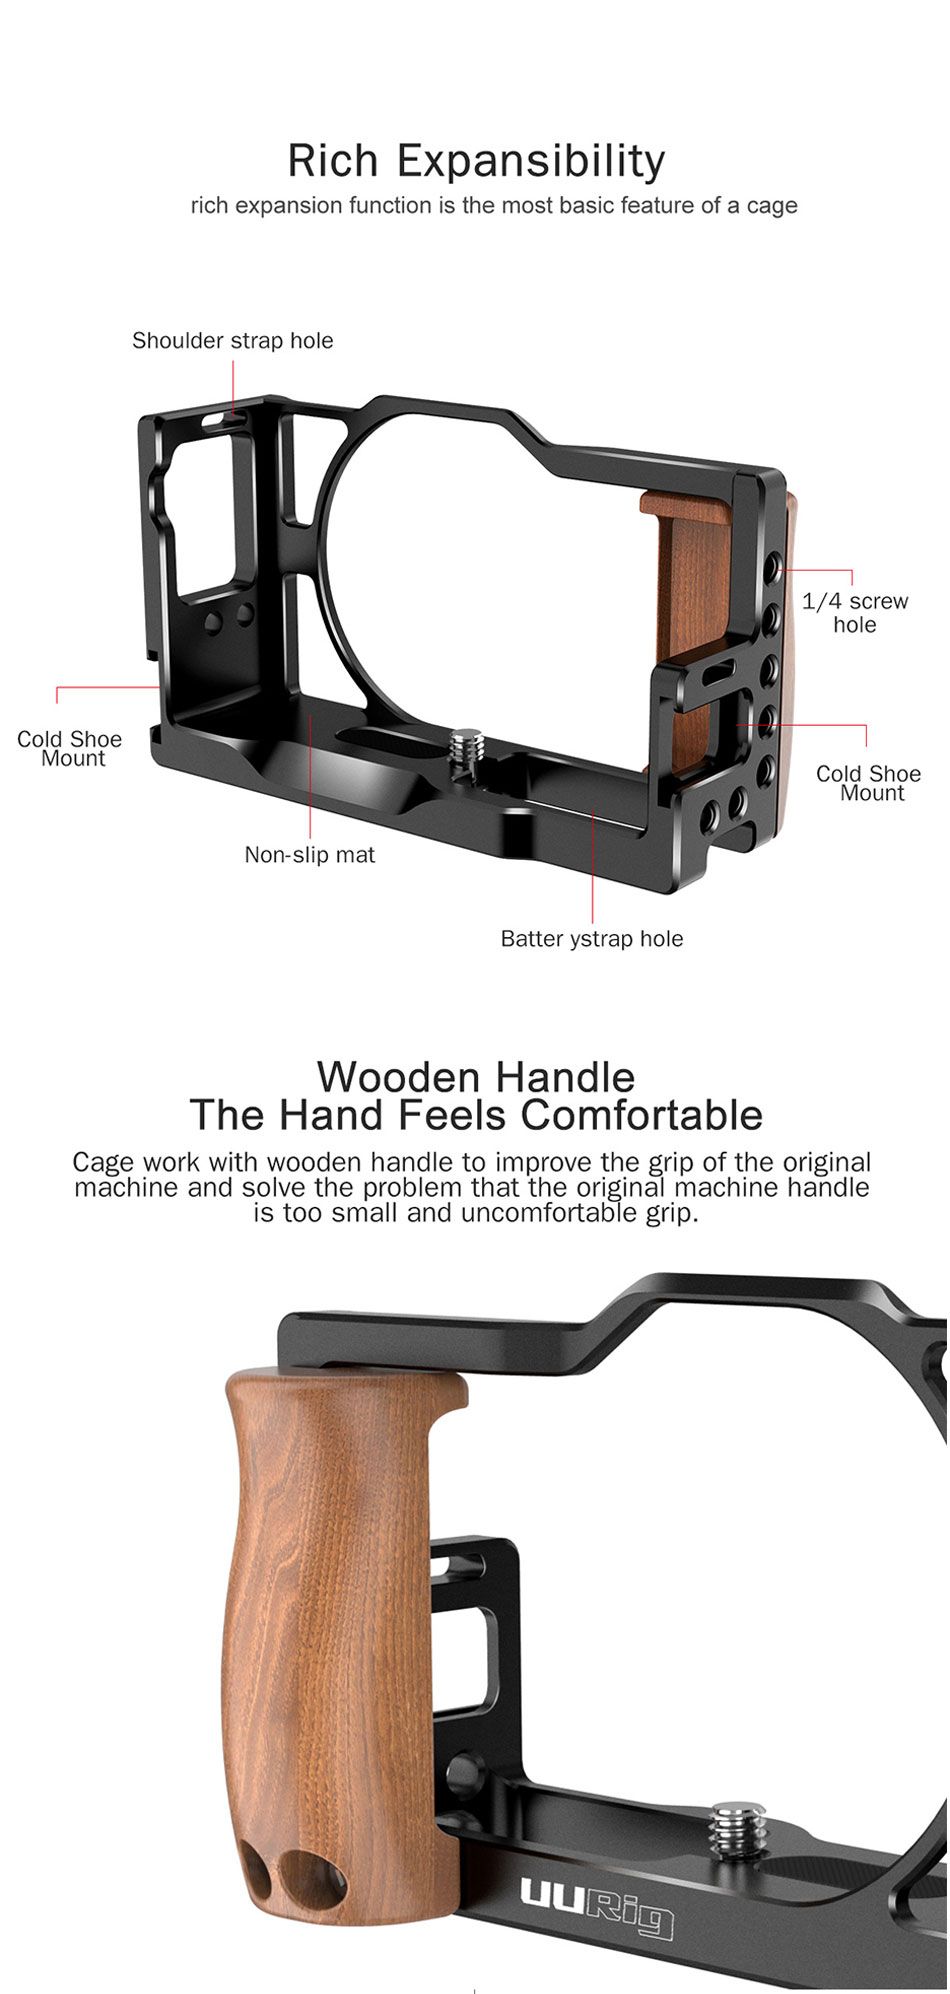 UURig-C-G7XMarkIII-Cage-Rig-Frame-Case-Stabilizer-for-With-Wooden-Handle-Hand-Grip-Cold-Shoe-Mount-f-1565584